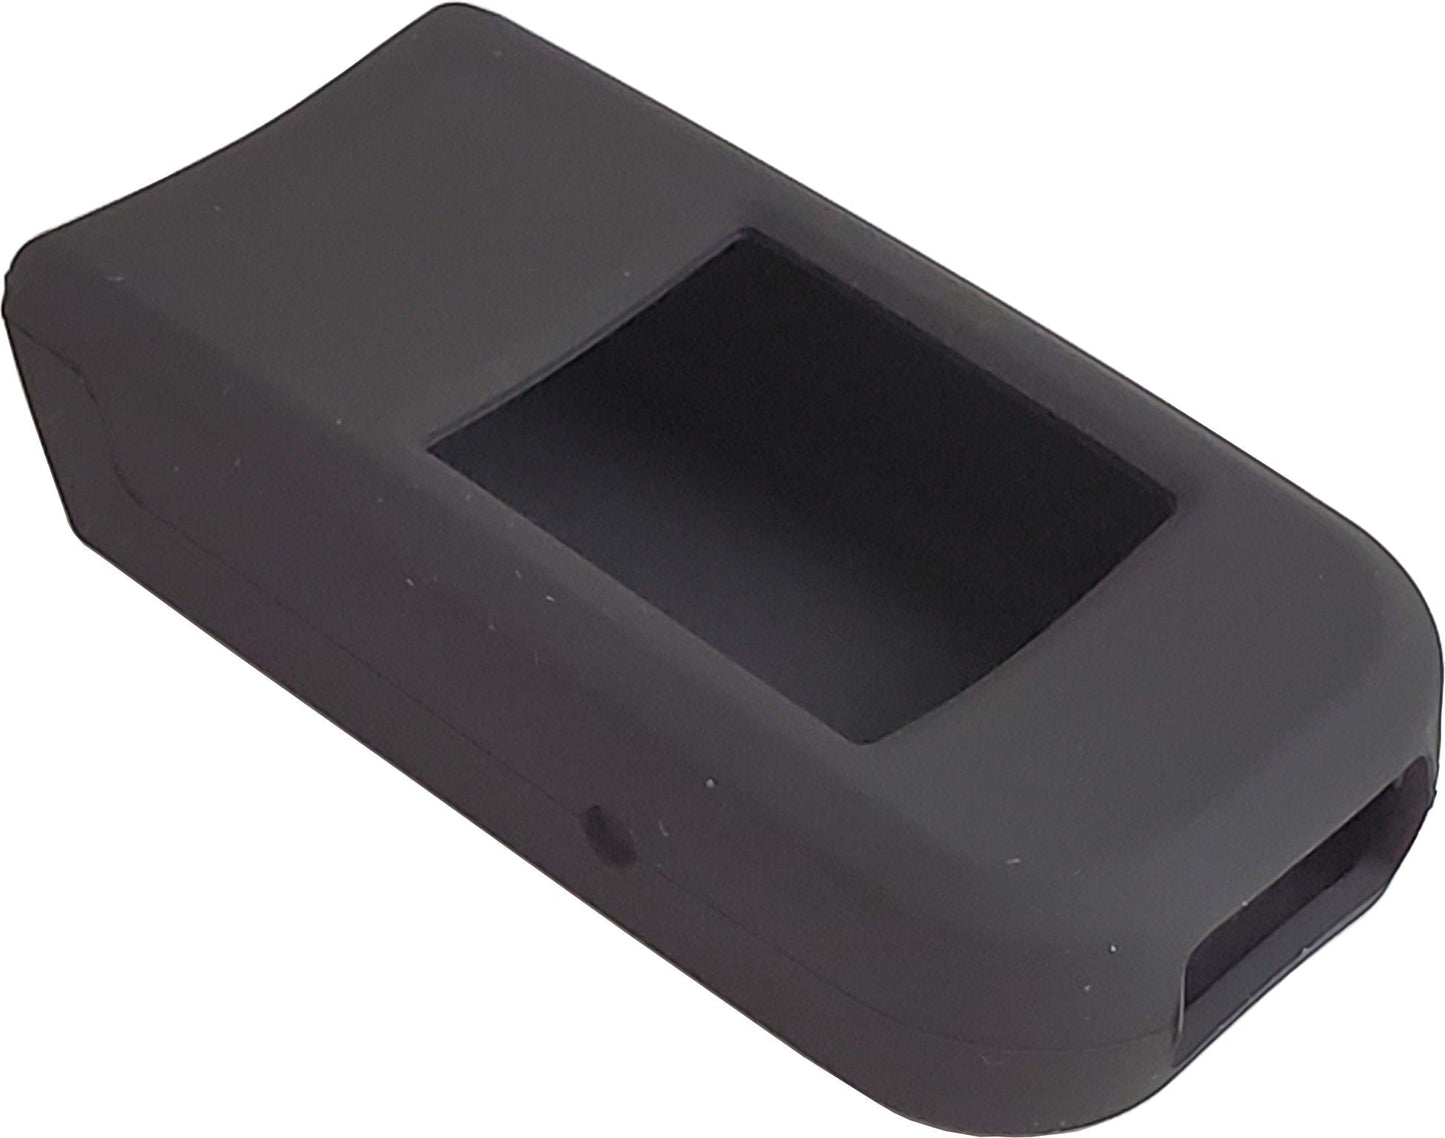 Scanfob® PX20 Protective Silicone Cover